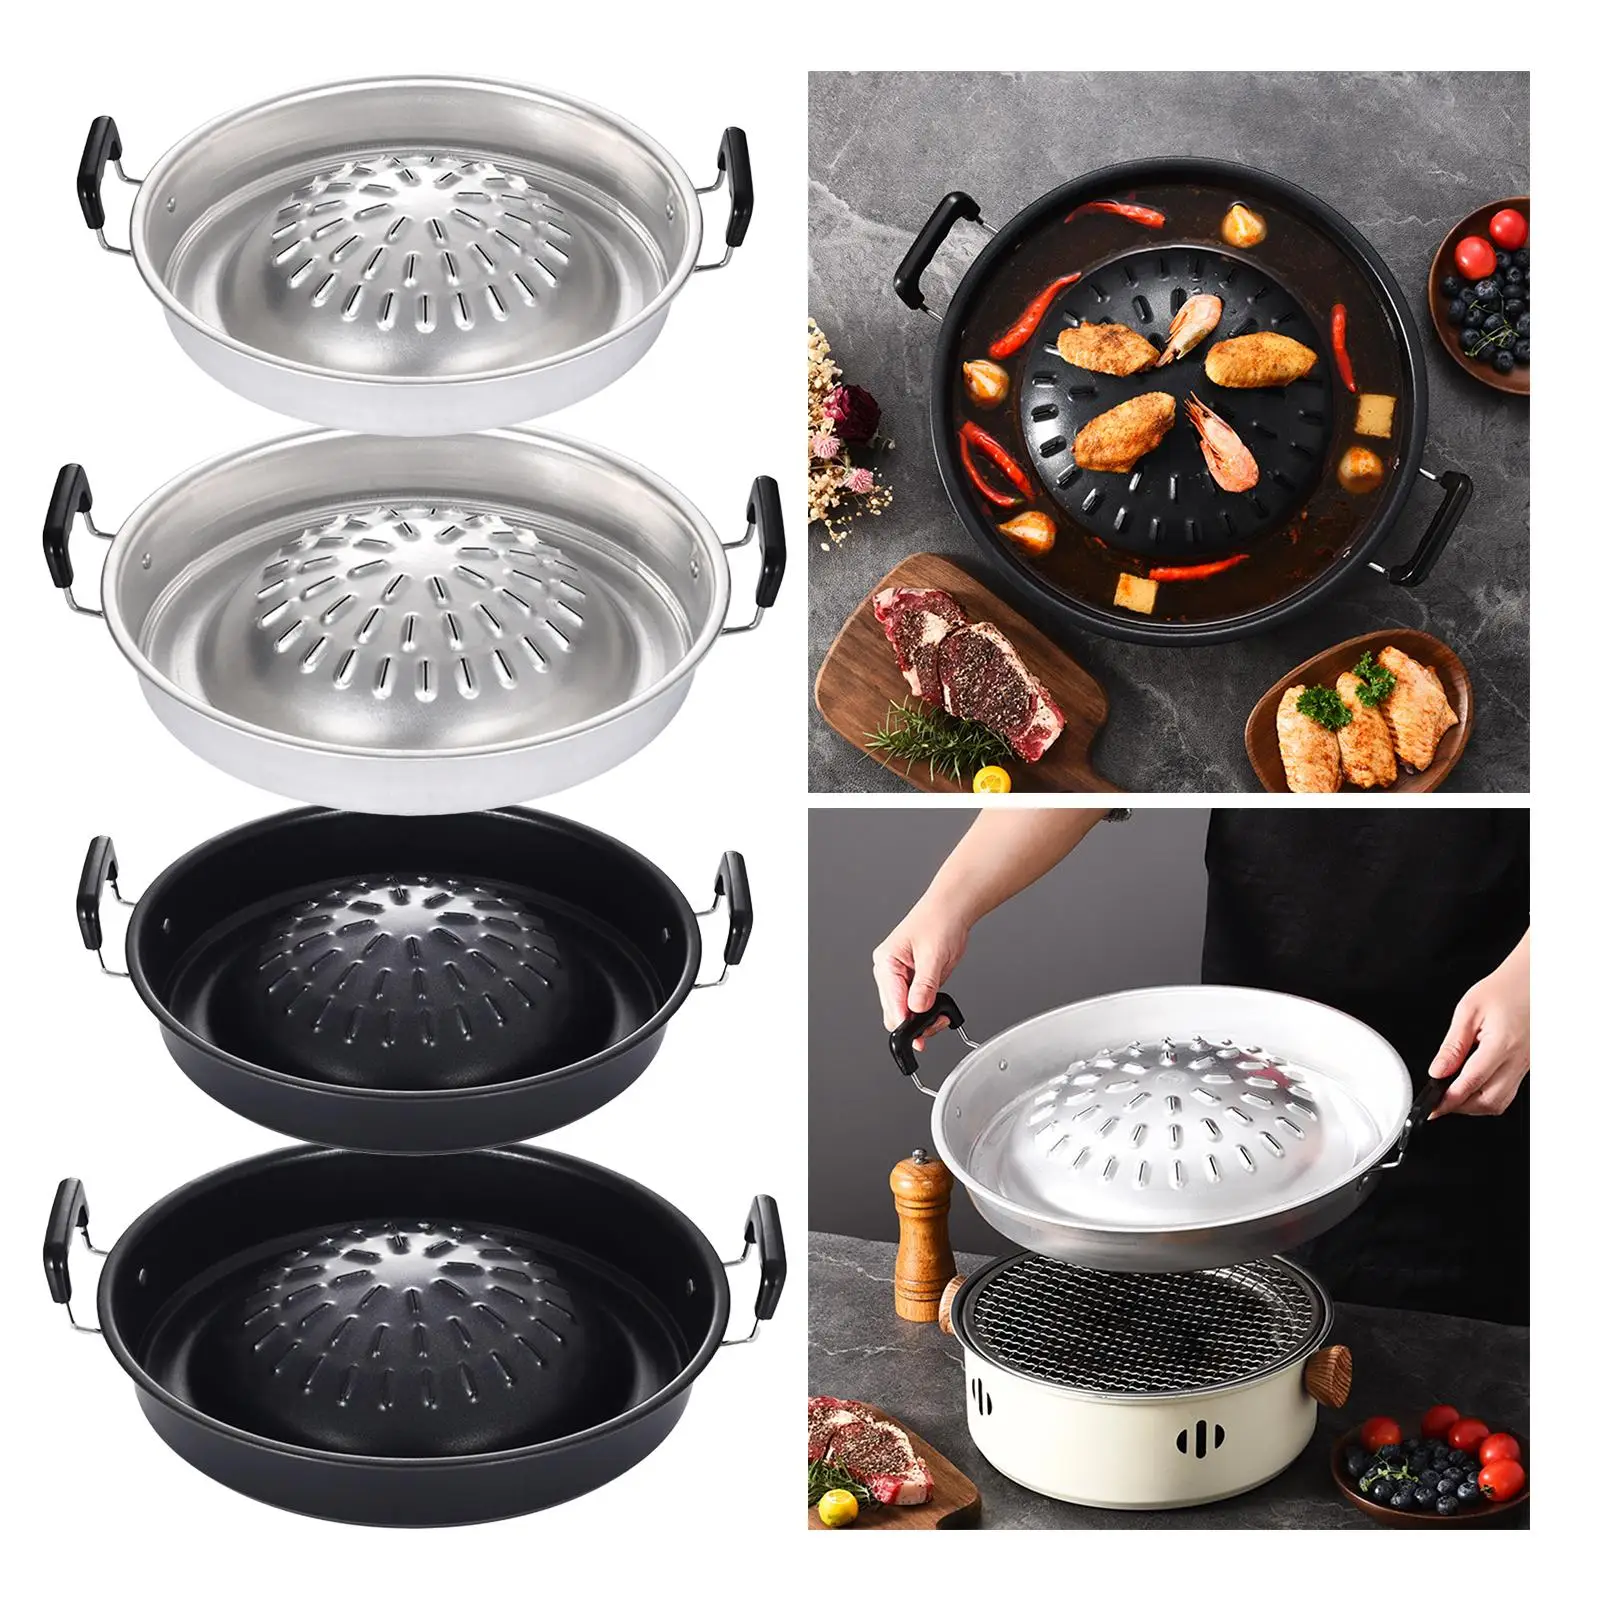 Camping Stove Grill Pan Picnic Round Indoor Outdoor 2in1 Cooking Meat Nonstick Roasting Pan Bbq Grill Pan Aluminum Grill Pan